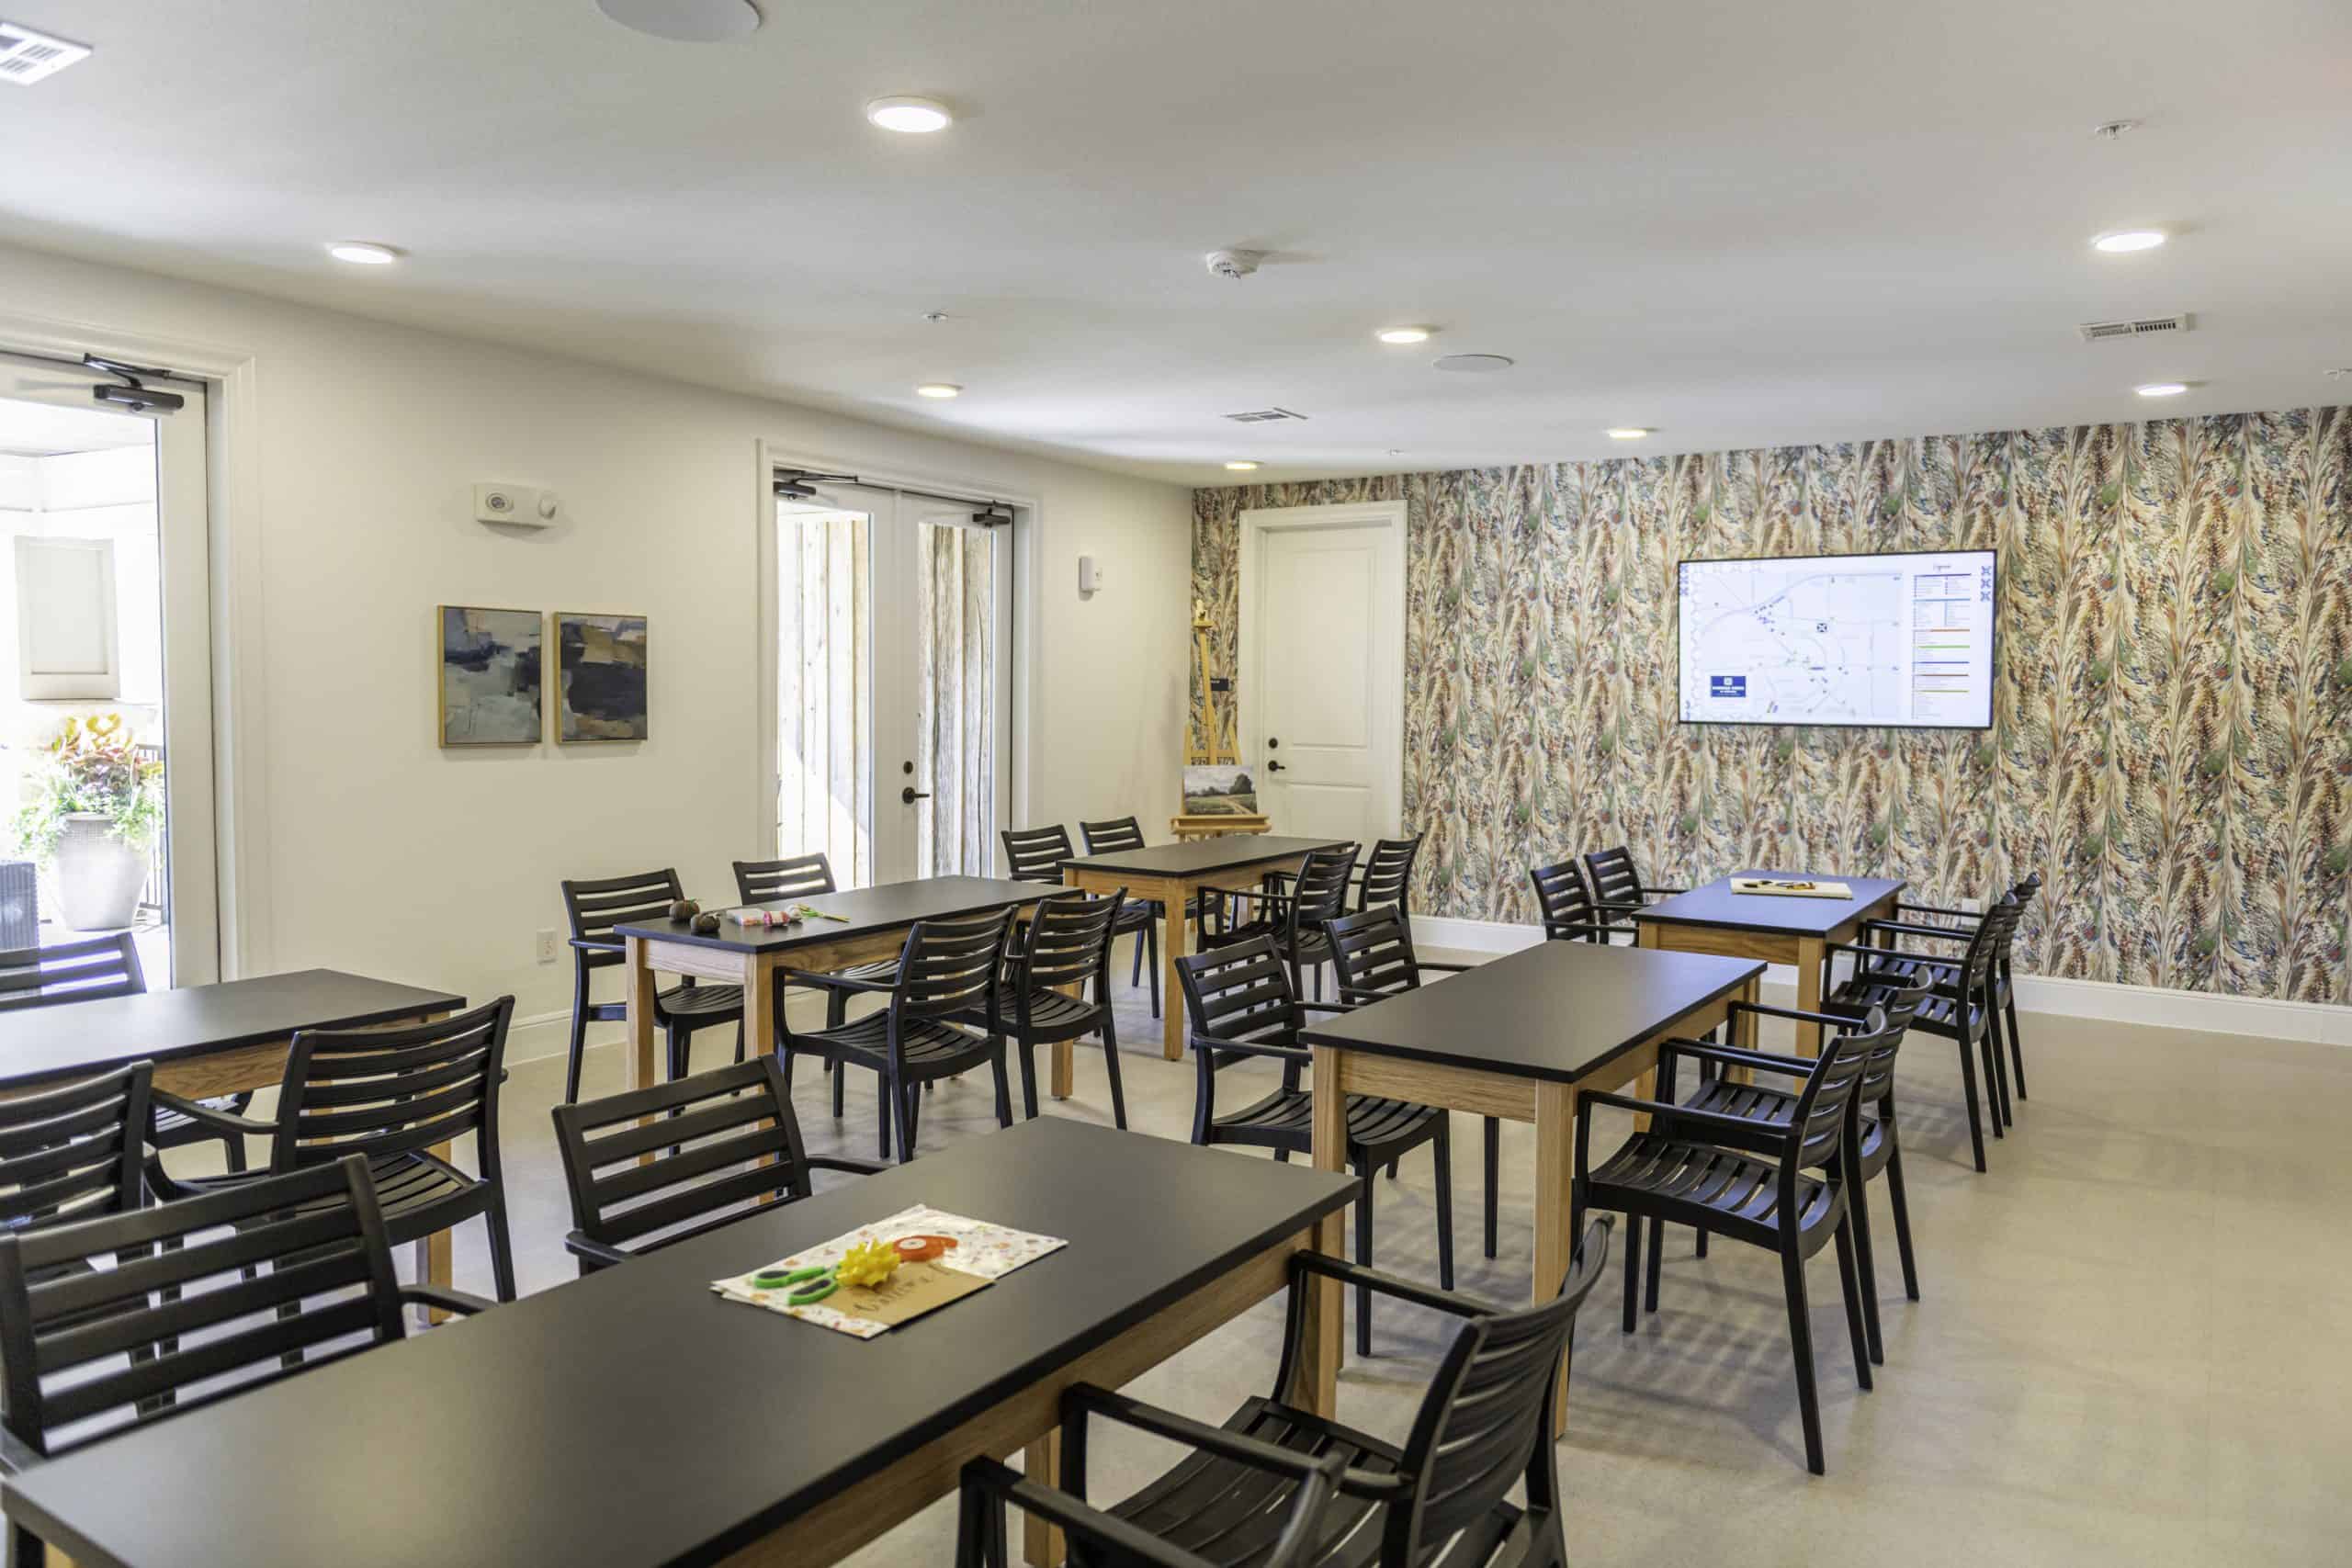 Community and event space at our 55 plus apartments in Cypress, TX, featuring tables, chairs, and a TV.